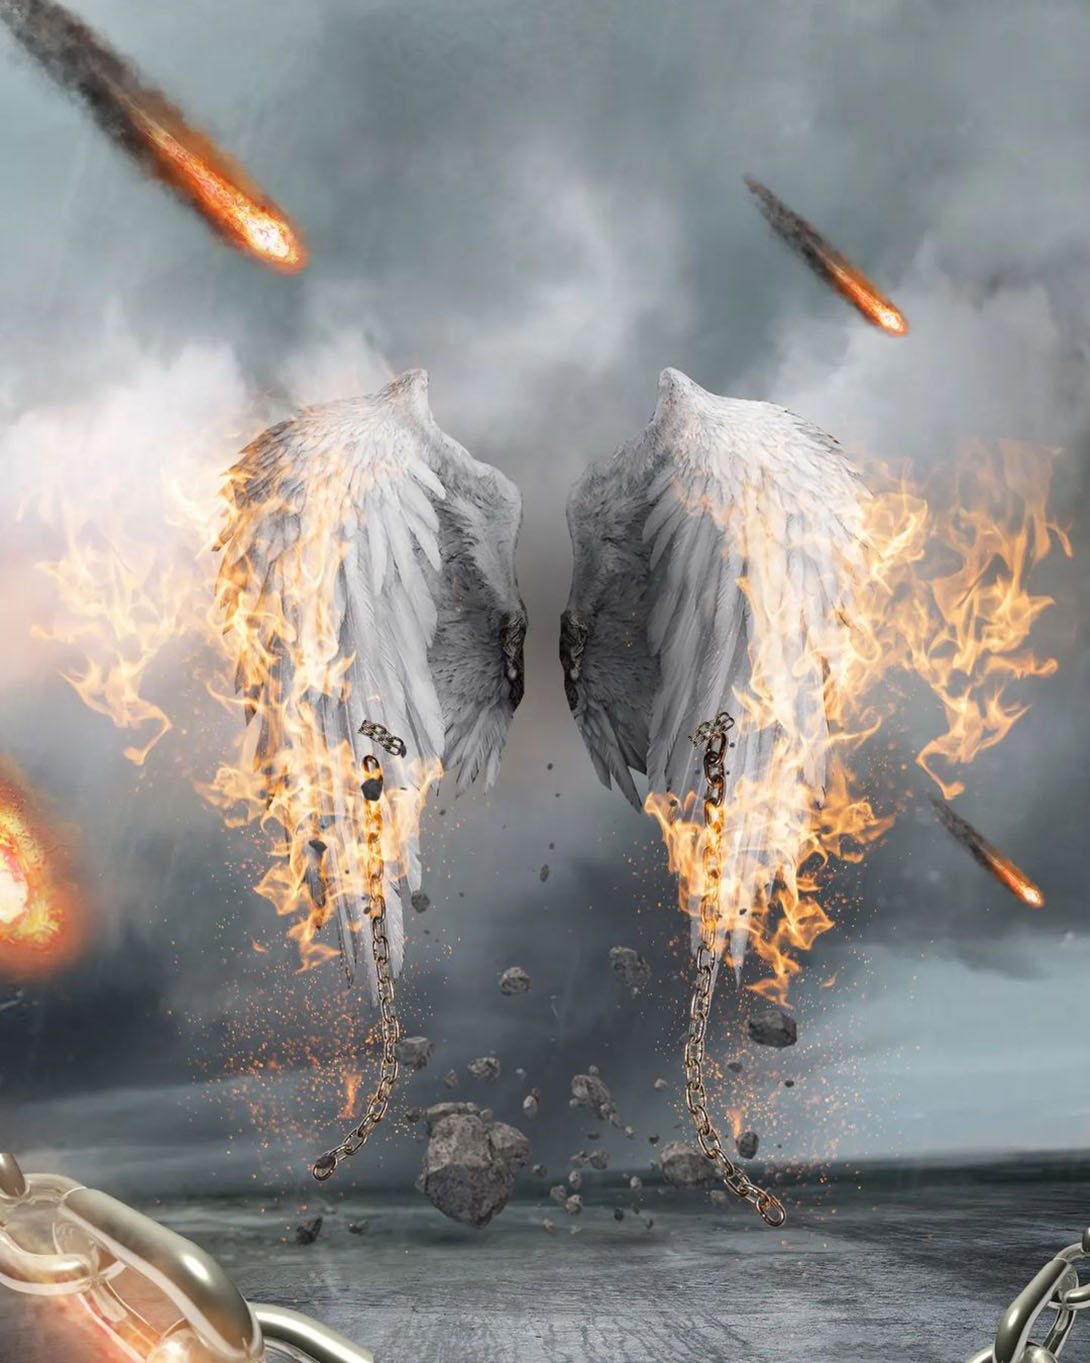  White Fire Wing PicsArt Editing Background Full HD Download ...